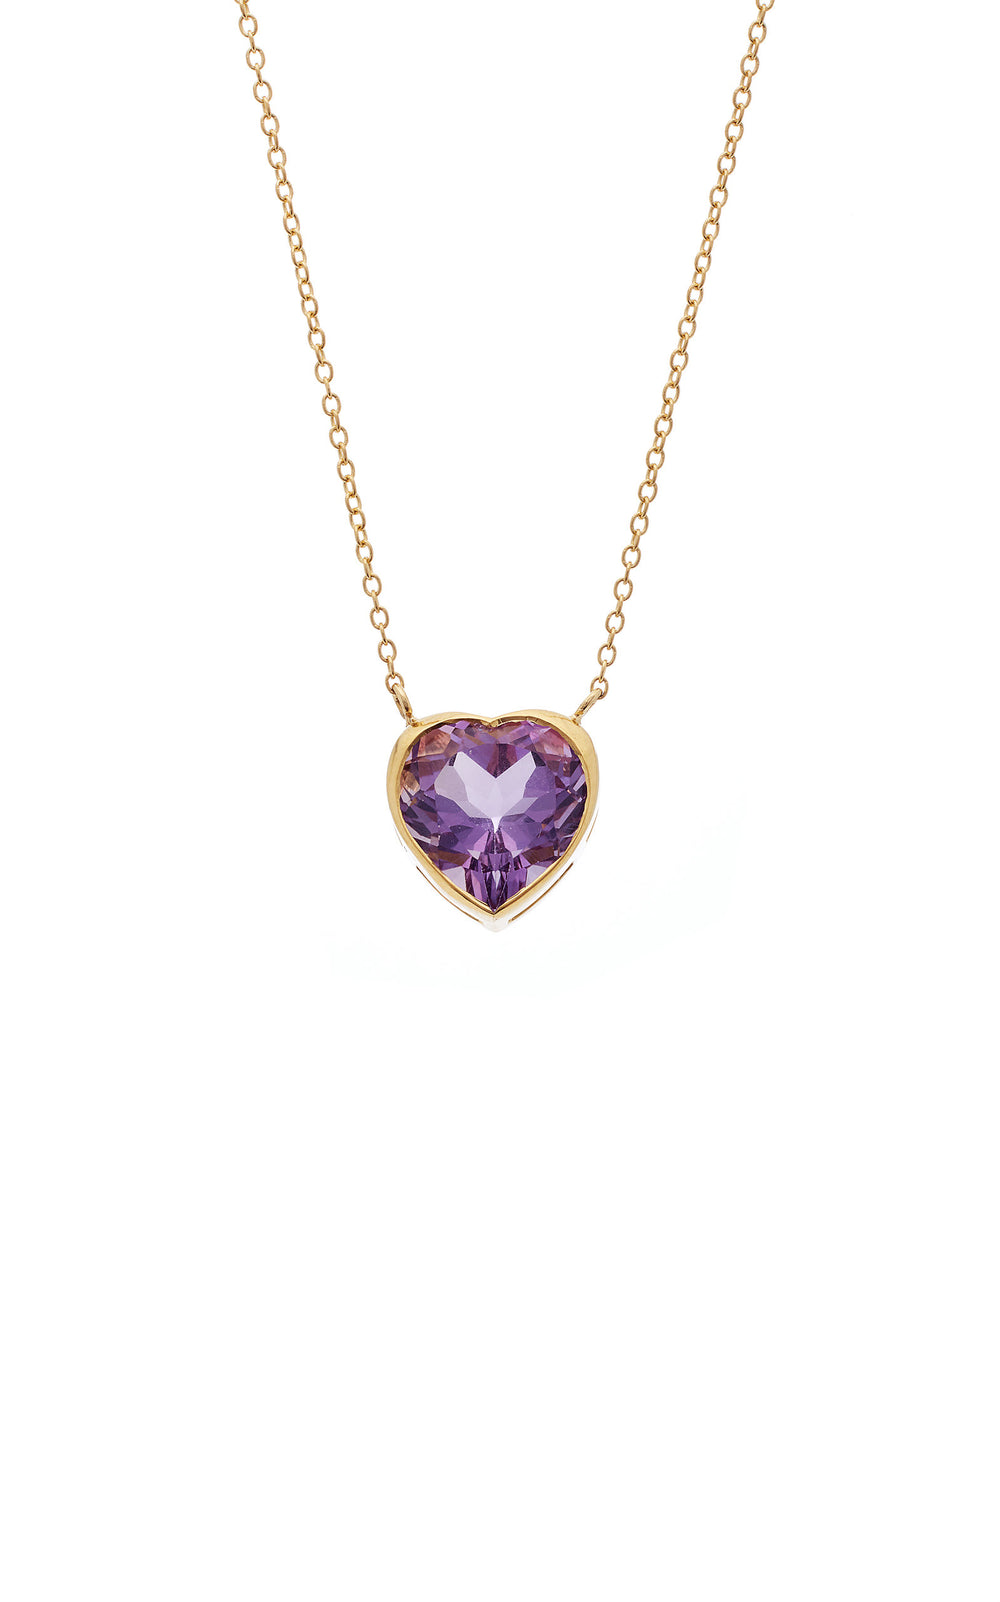 heart collection gold necklace fine jewelry purple amethyst diamond